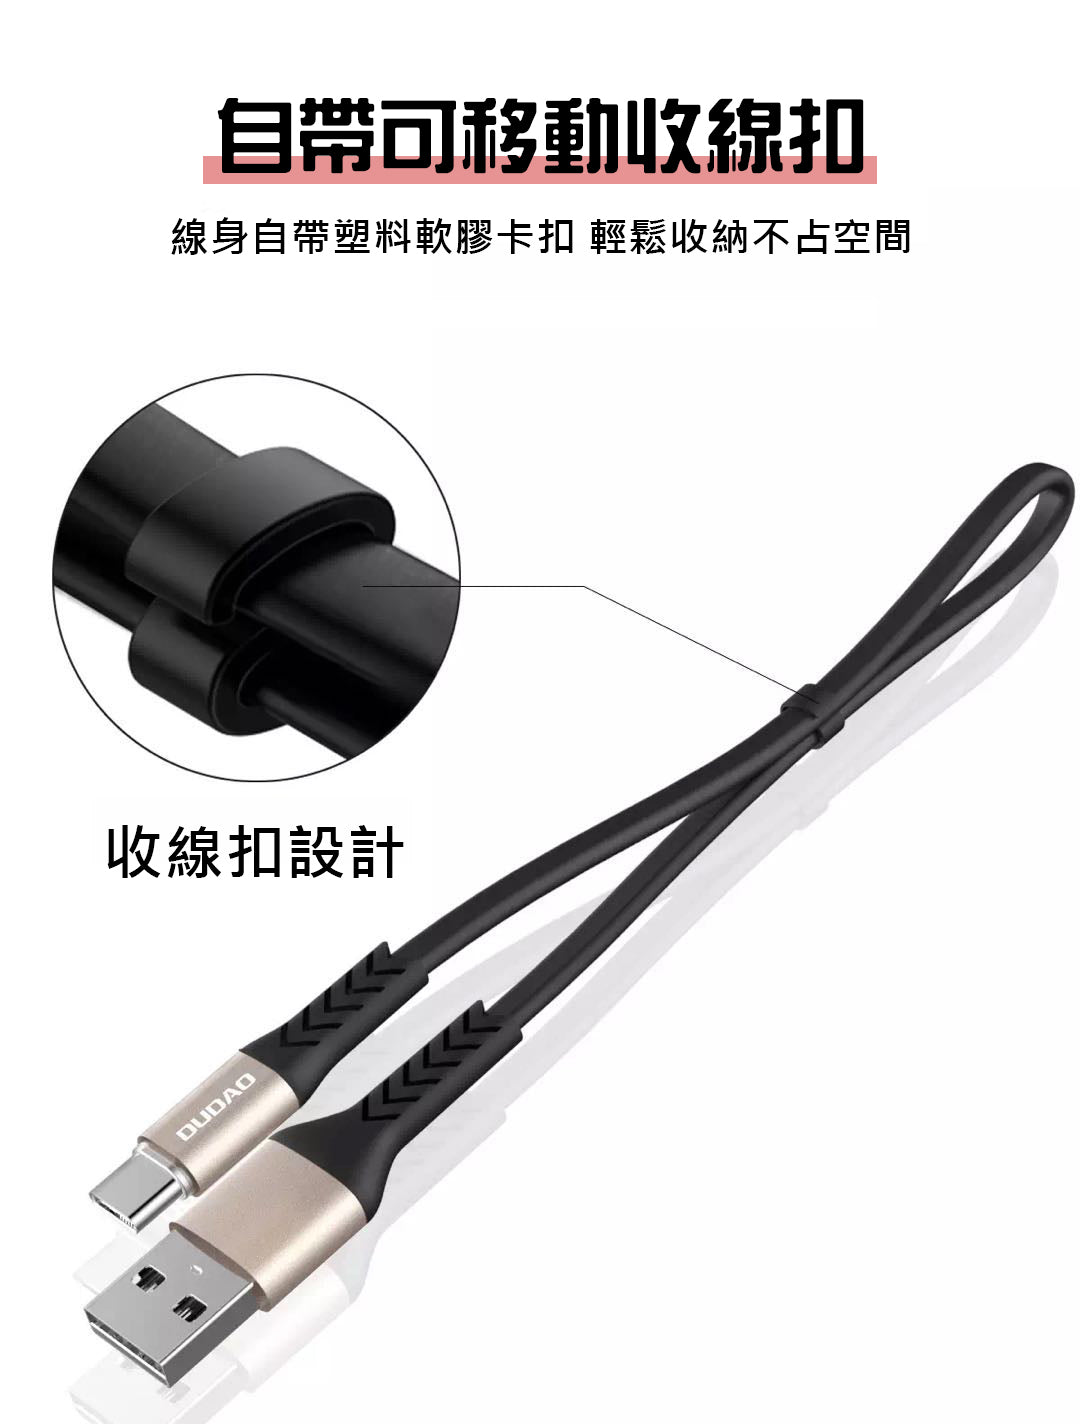 Dudao 5A Lightning / Type-C 23cm Charging Cable Easy Carry 20000 times Bending test pass